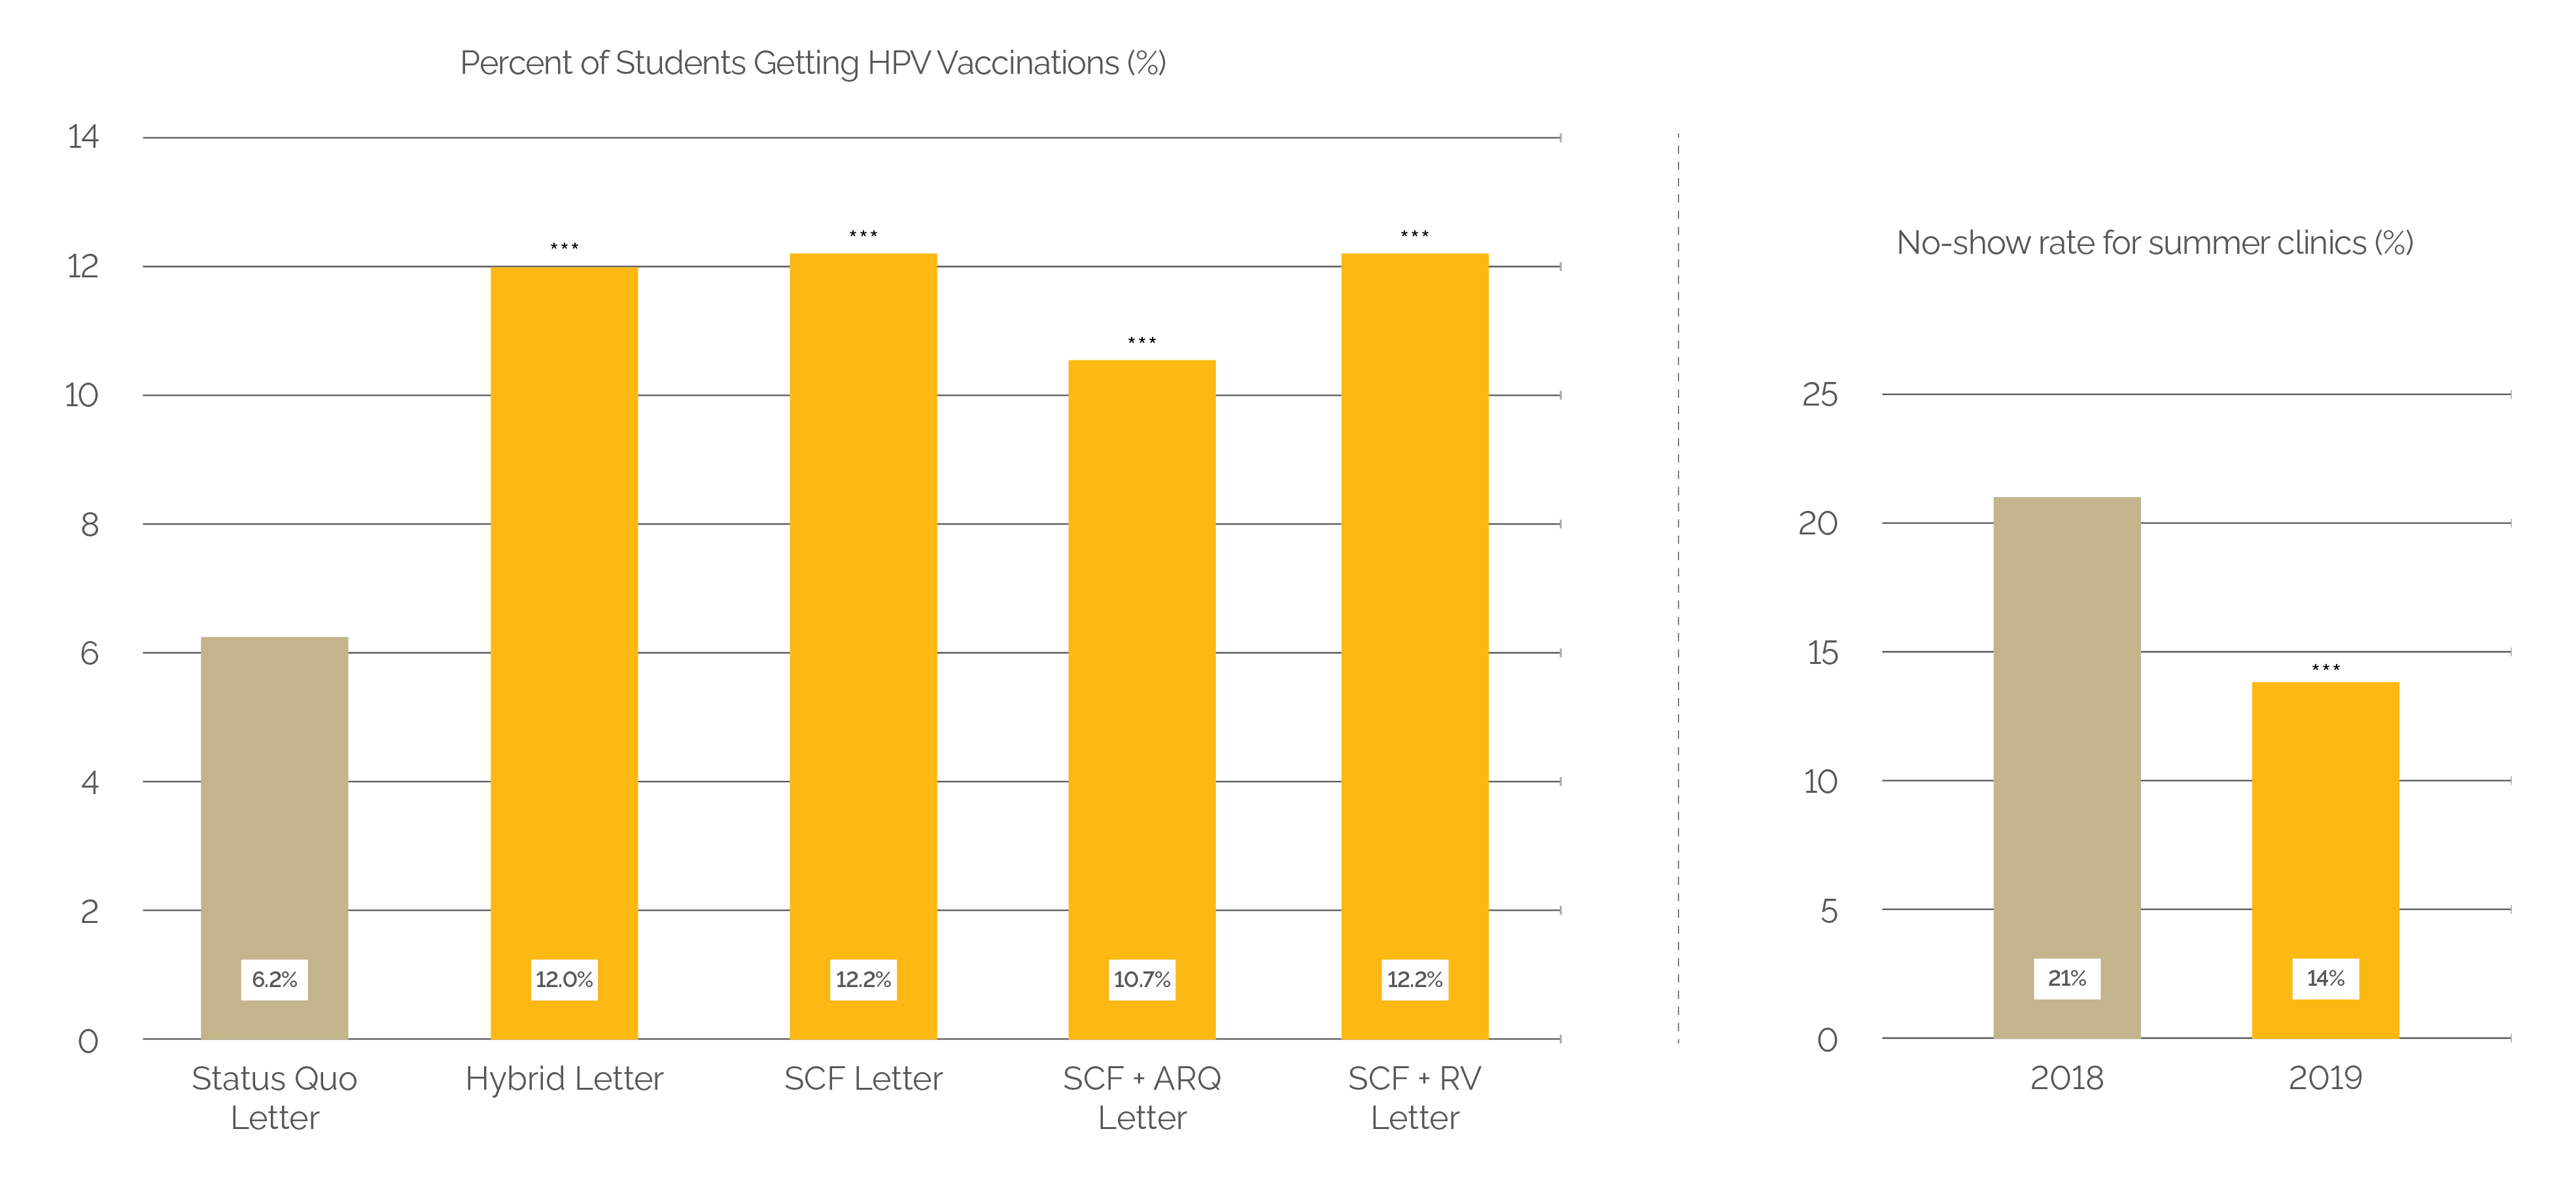 Two graphs comparing HPV vaccination rates in 2018 and 2019.